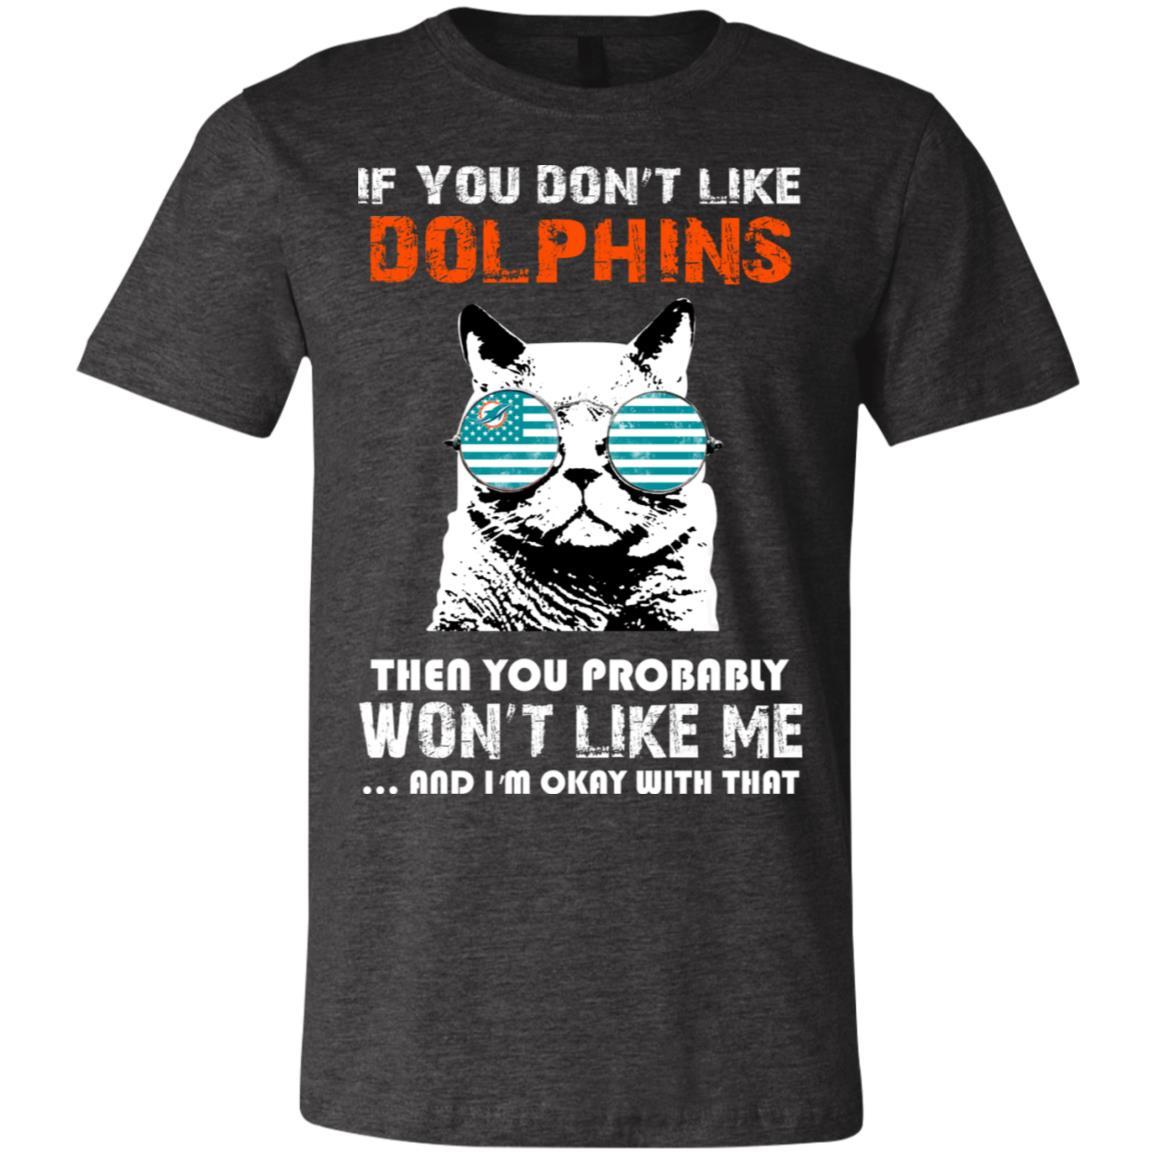 Miami Dolphins Shop - If You Don't Like Miami Dolphins Tshirt For Fans 2